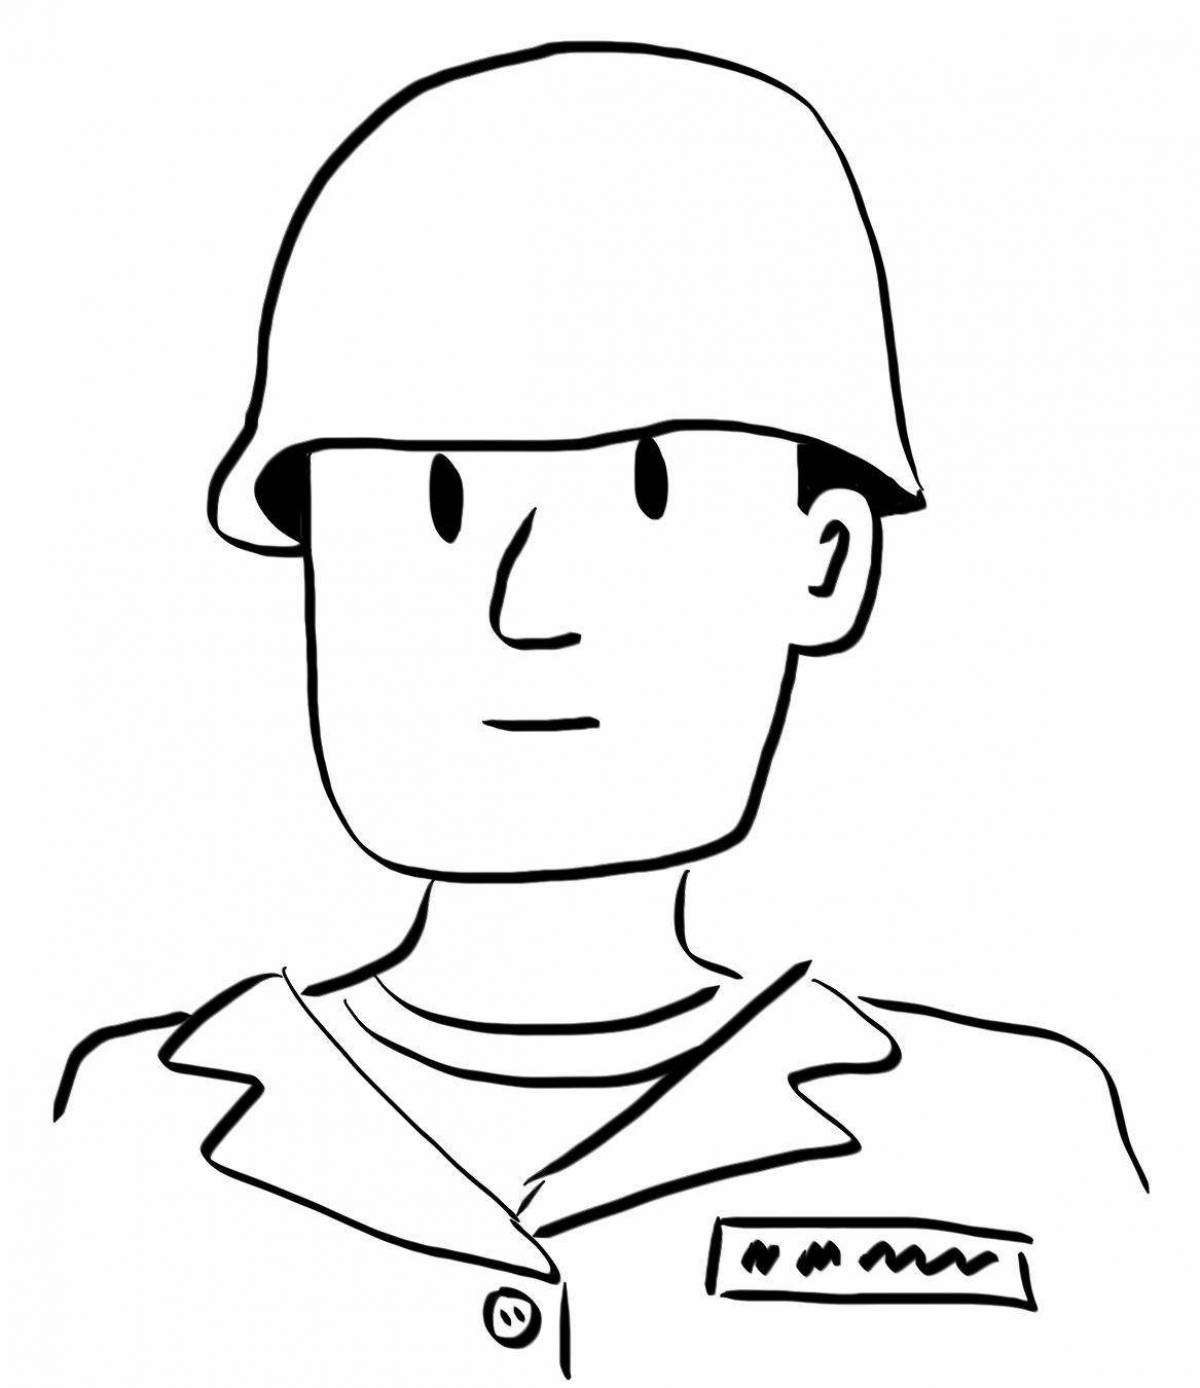 Coloring book shiny military portrait